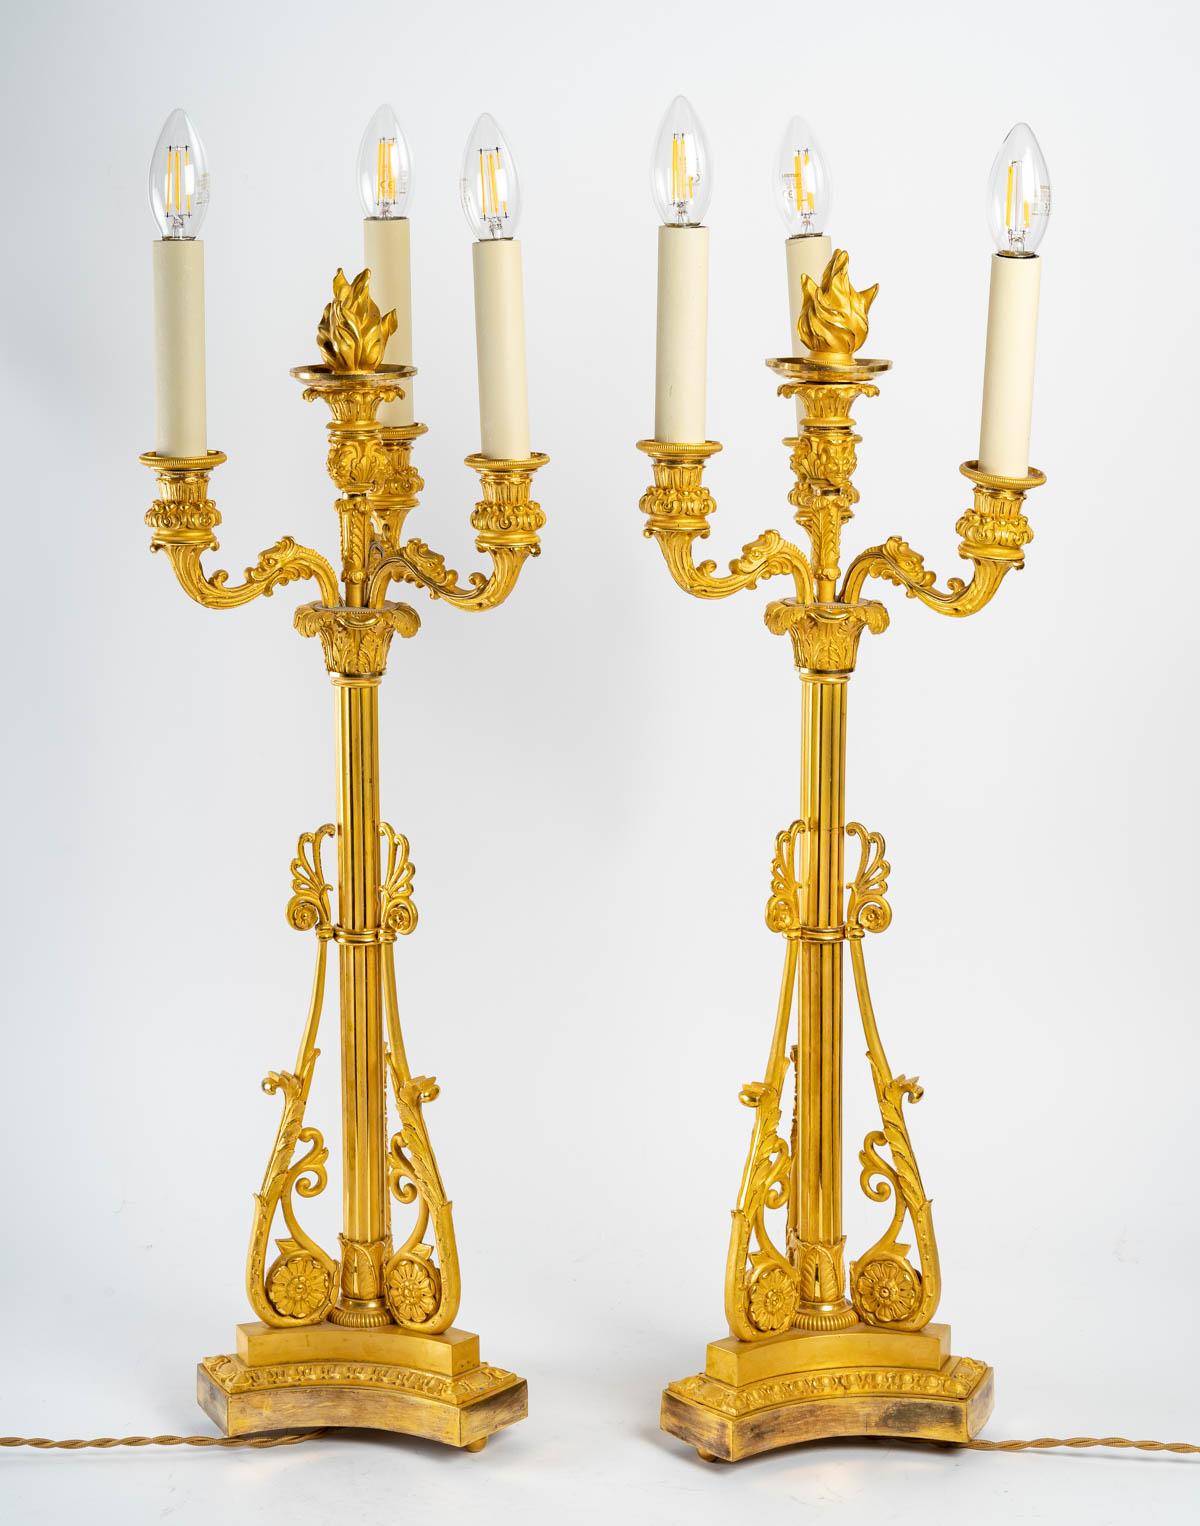 Pair of early 19th century gilt bronze candlesticks, gilded with mercury. 
Measures: H: 69 cm, W: 24 cm, D: 24 cm.